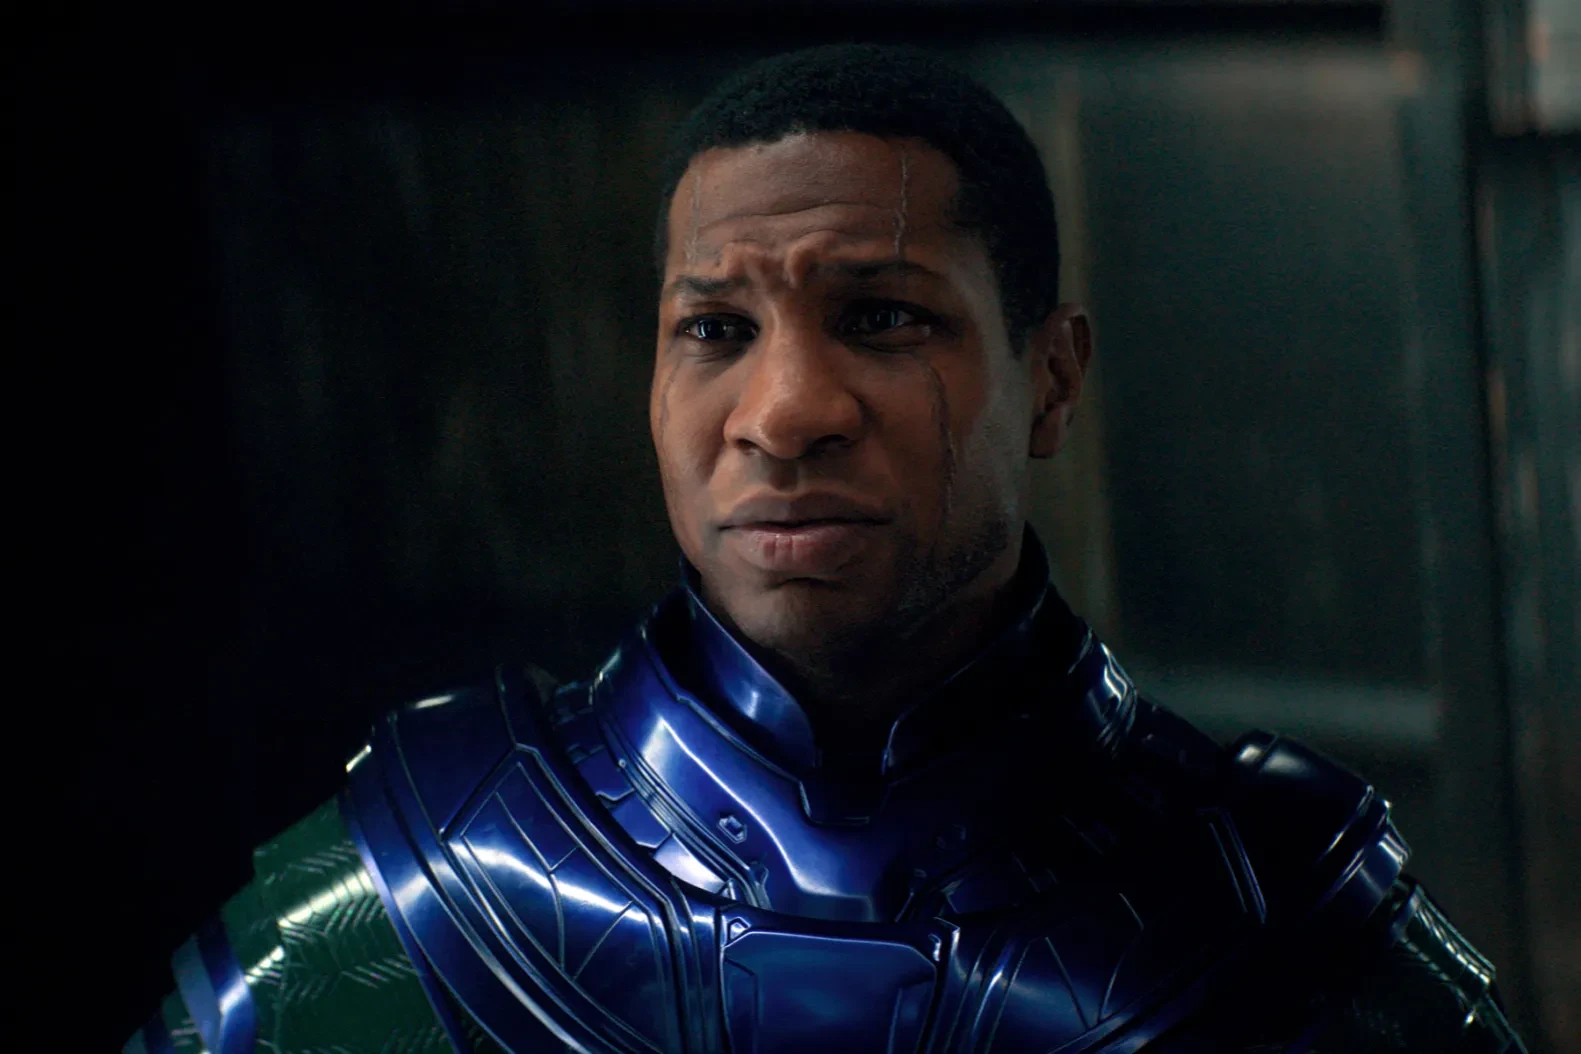 Jonathan Majors as Kang the Conqueror in Ant-Man and the Wasp: Quantumania | Marvel Studios